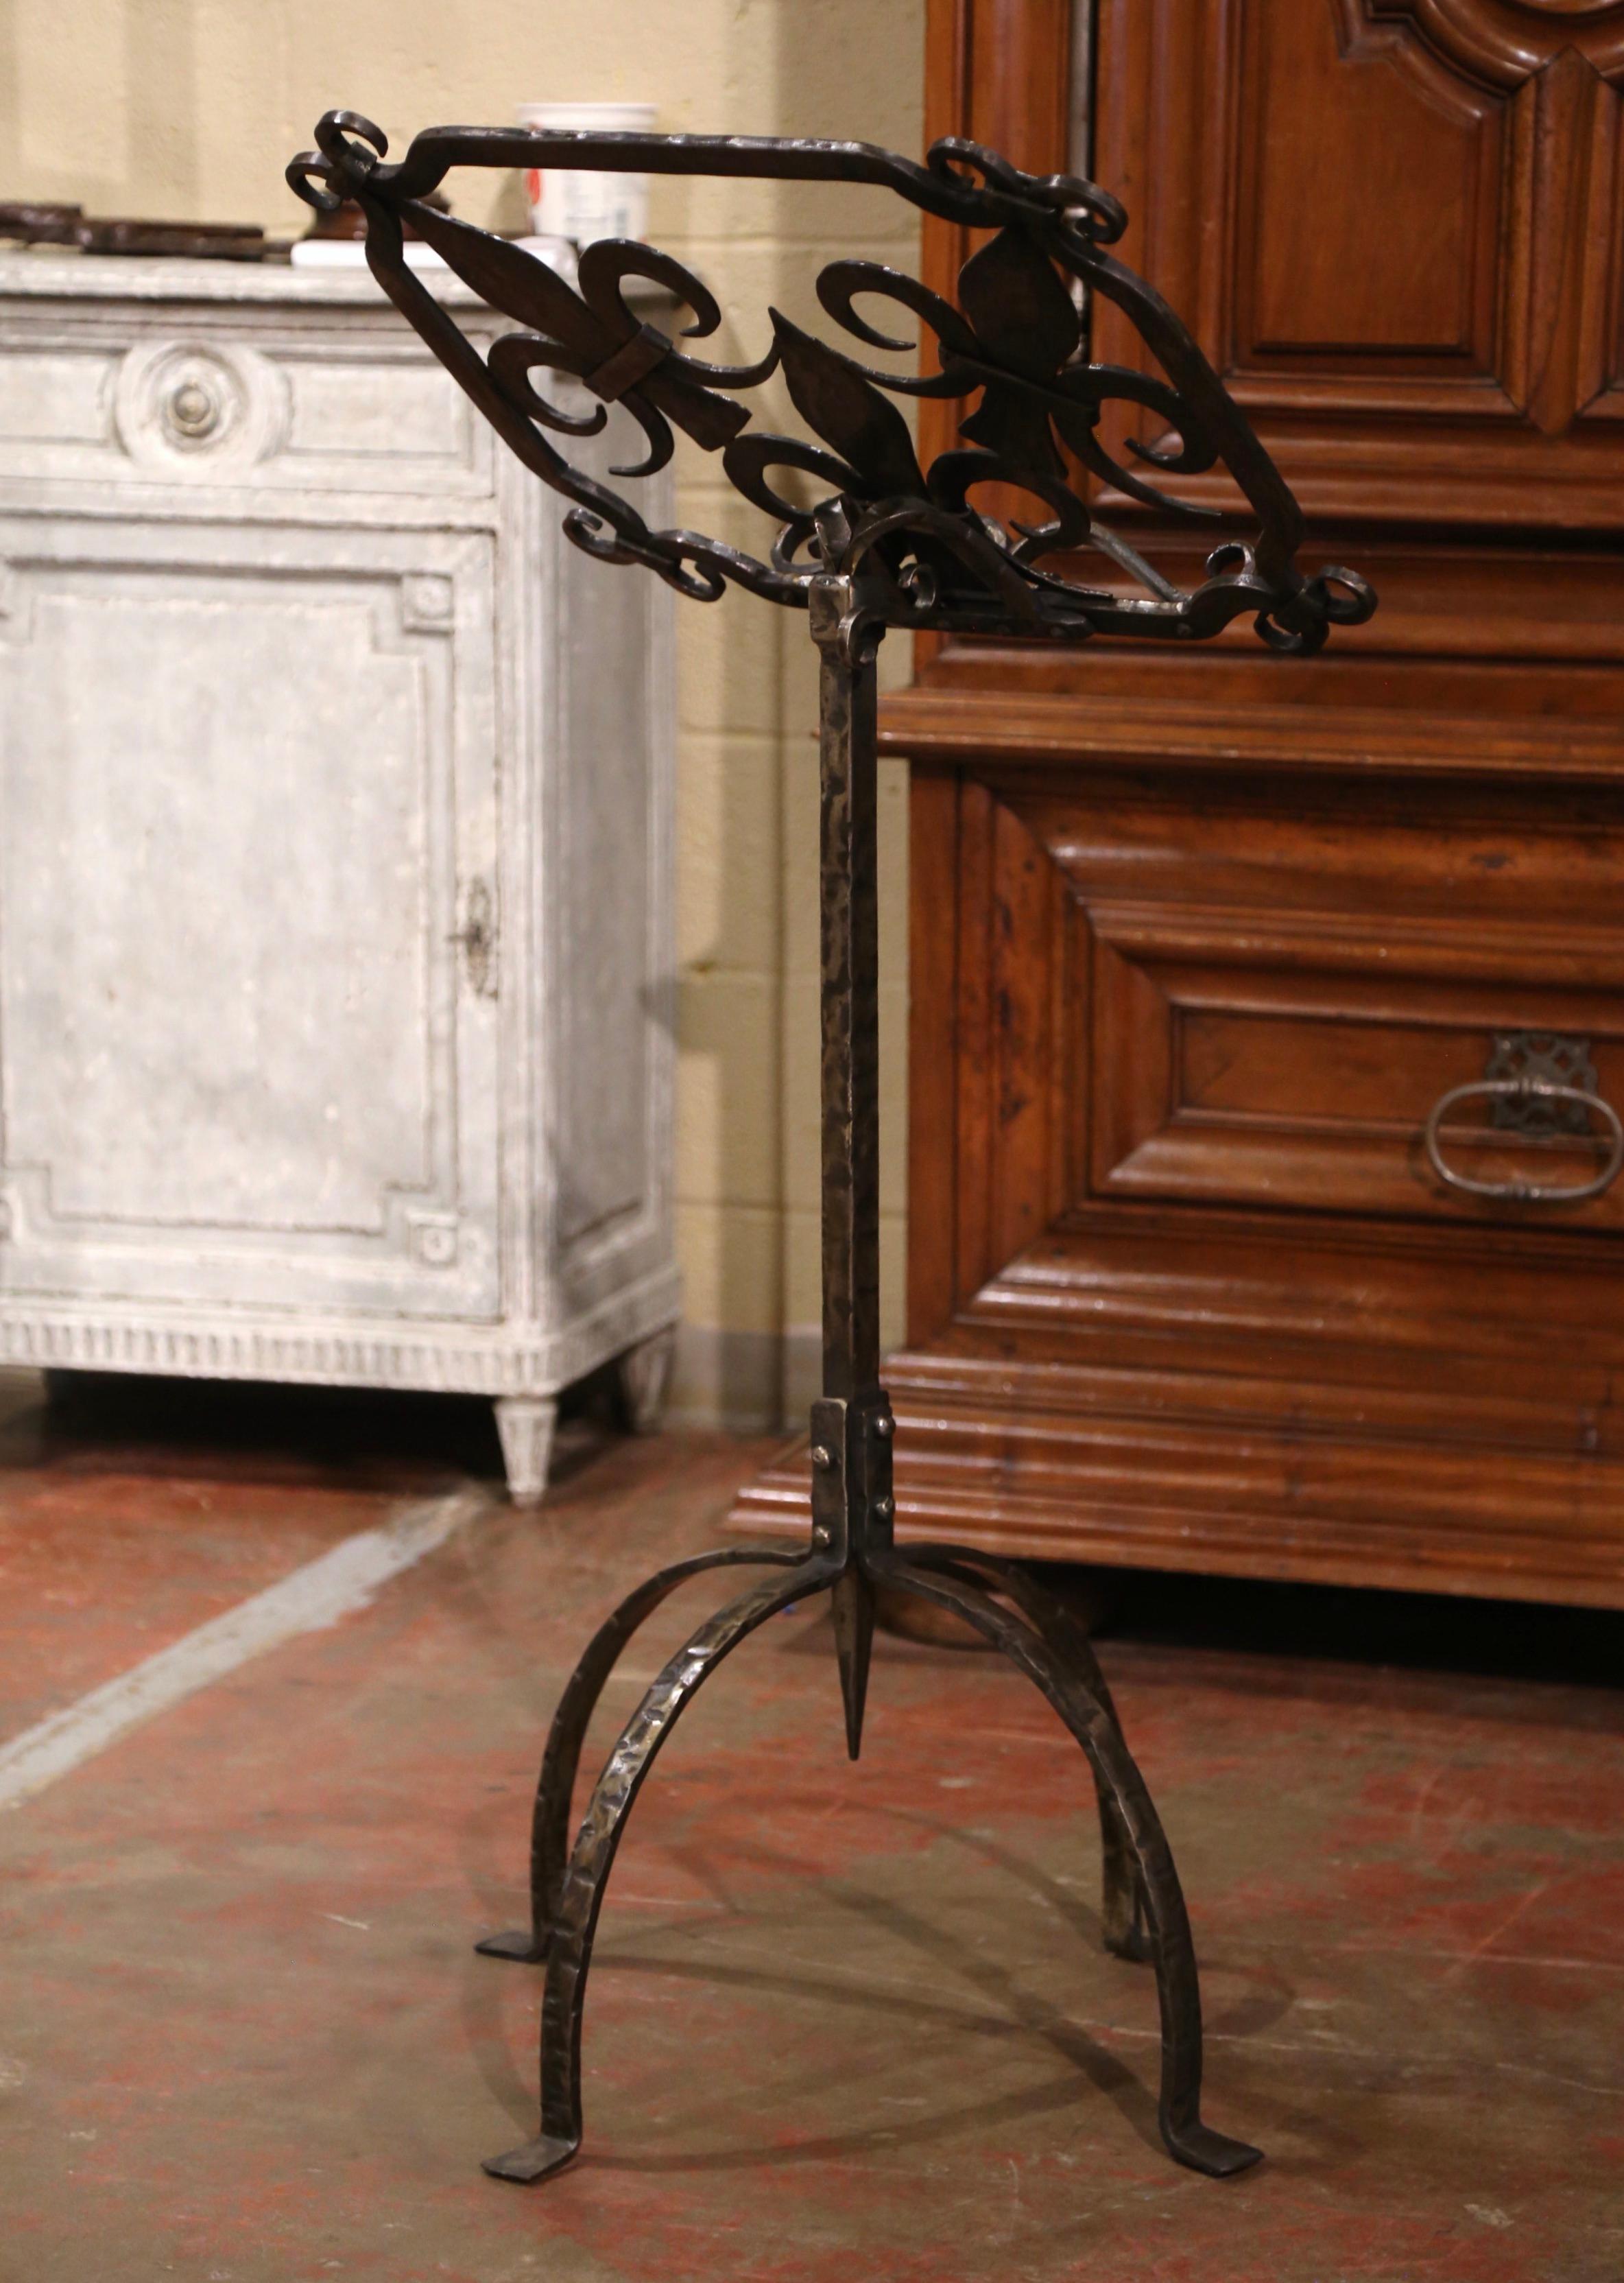  19th Century French Forged Iron Music Stand Lectern with Fleur-de-Lys Decor 4